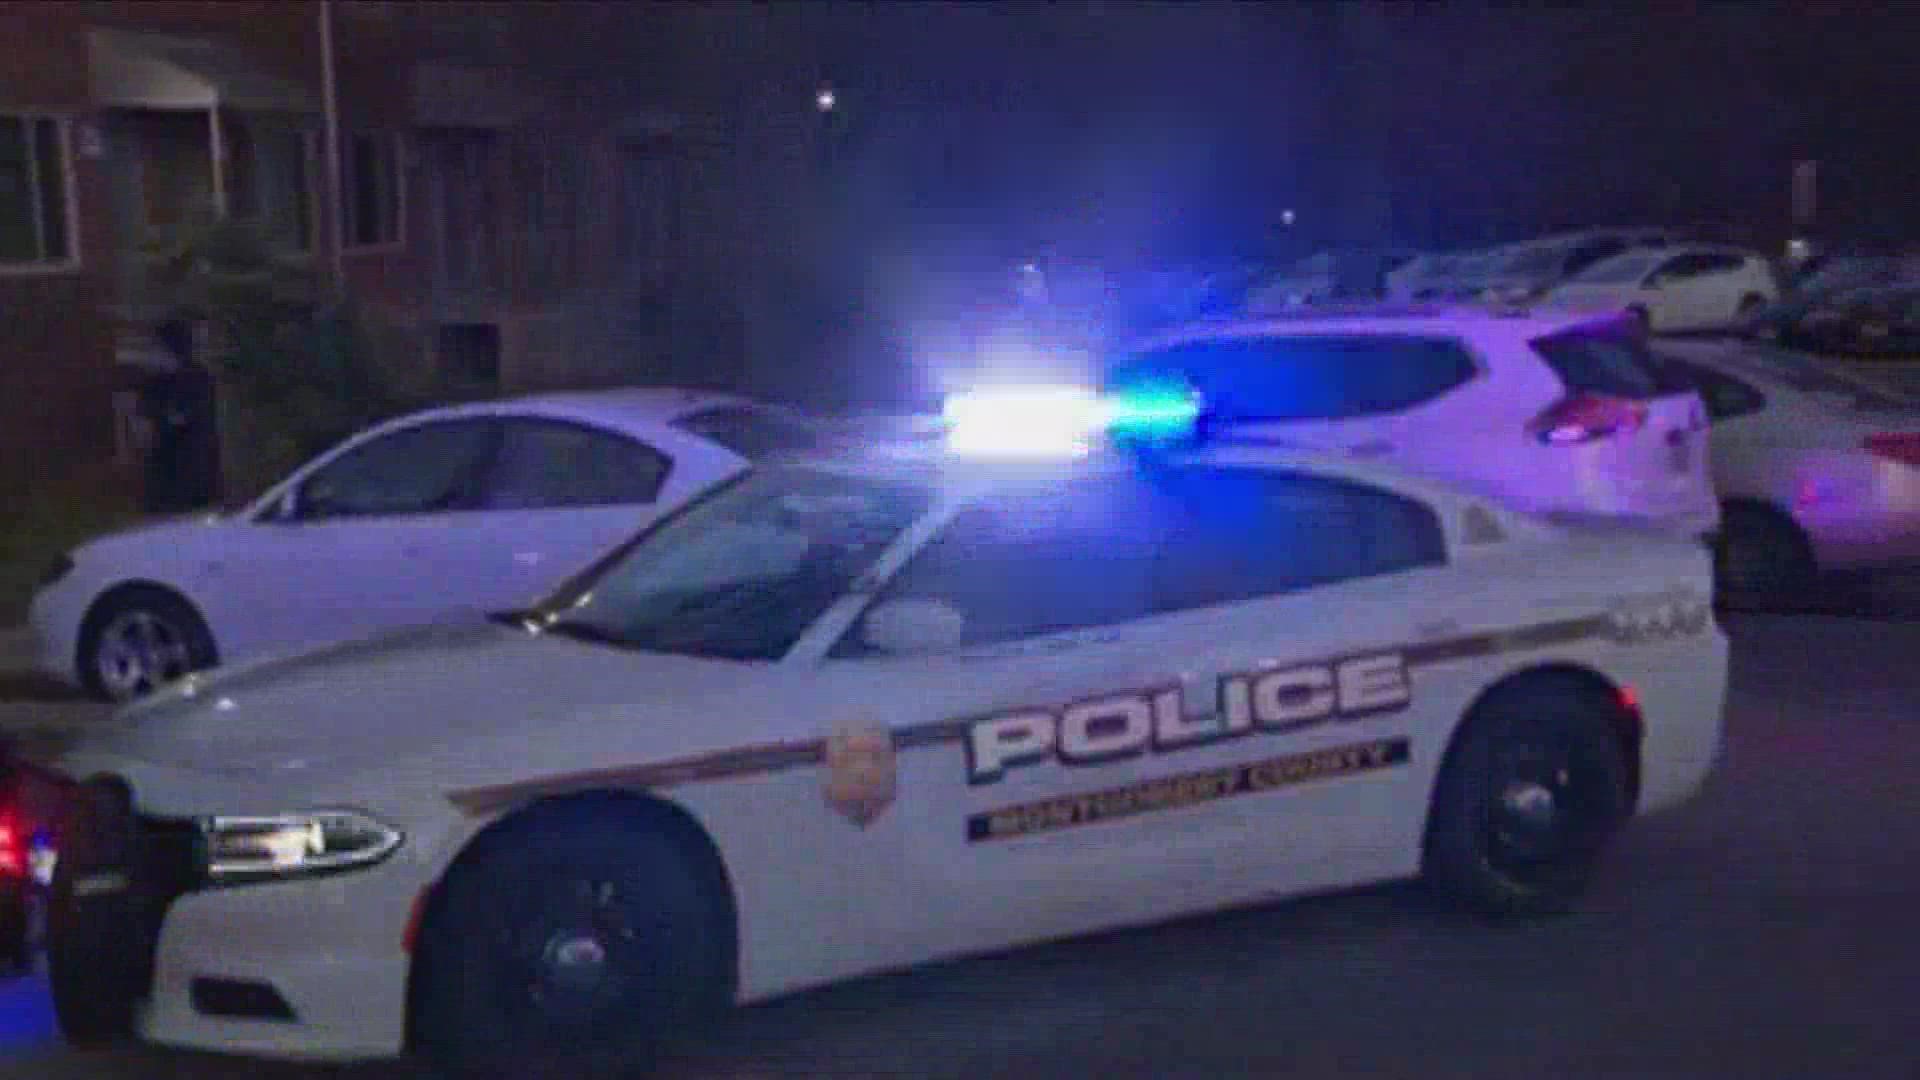 Authorities in Montgomery County are responding to a report of multiple people shot early Wednesday morning.